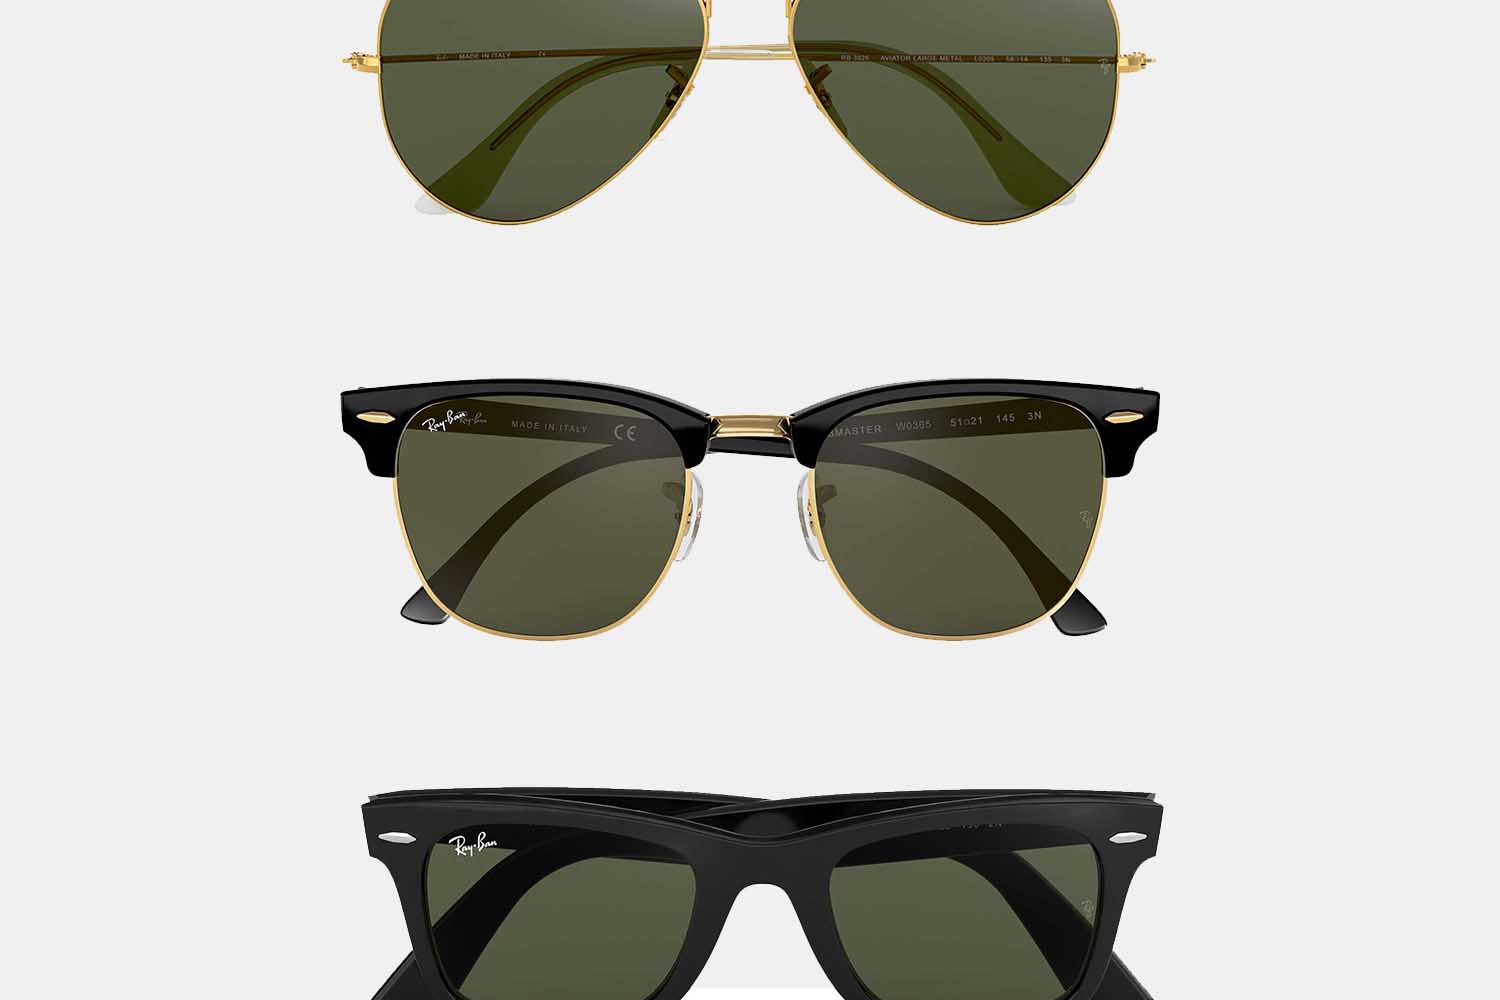 Deal: A Ton of Classic Ray-Bans Are on 